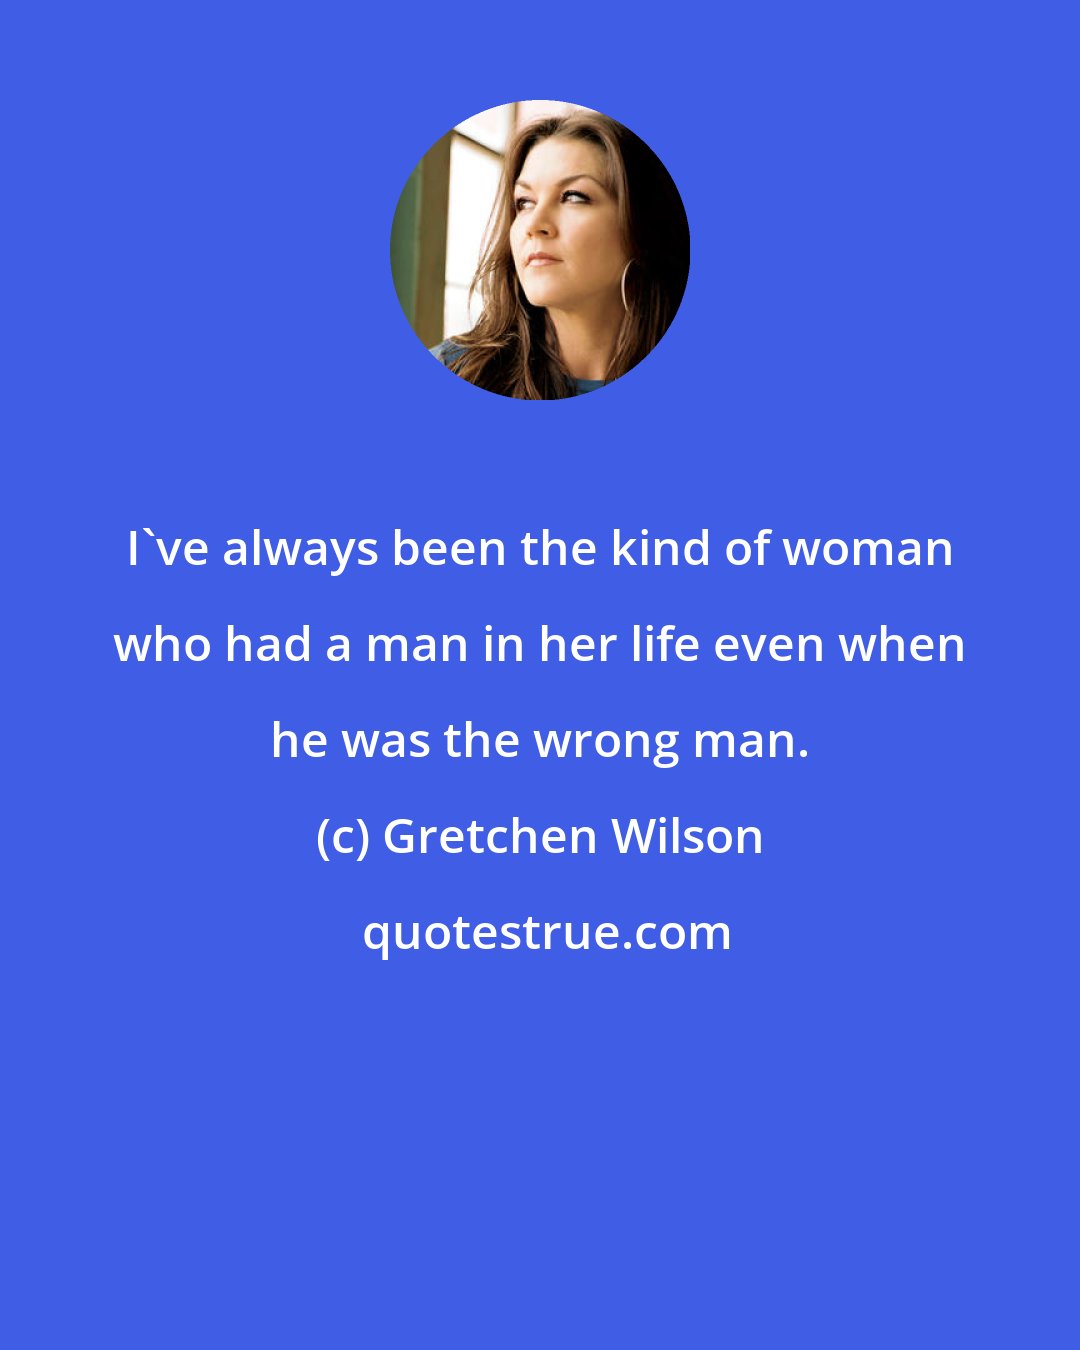 Gretchen Wilson: I've always been the kind of woman who had a man in her life even when he was the wrong man.